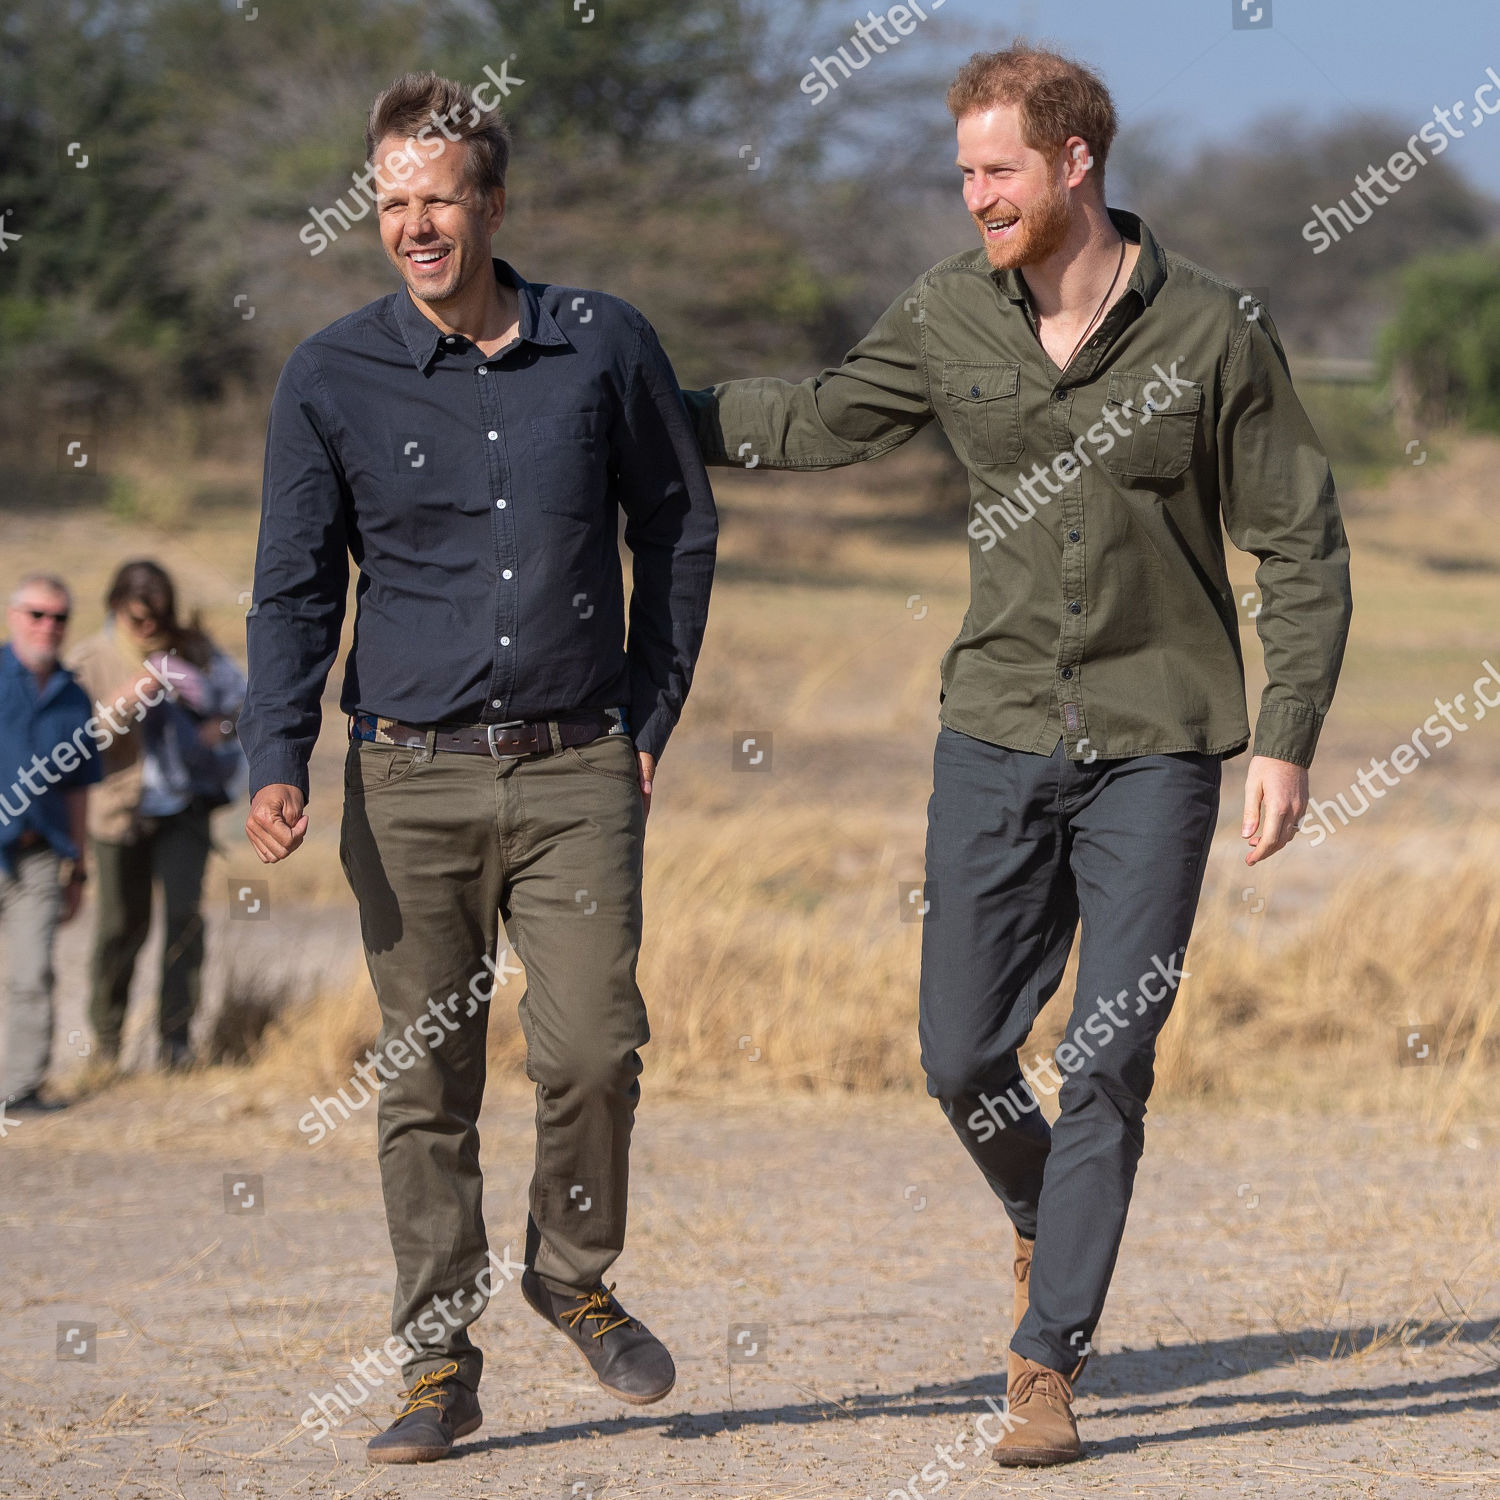 prince-harry-visit-to-africa-shutterstock-editorial-10424667ac.jpg